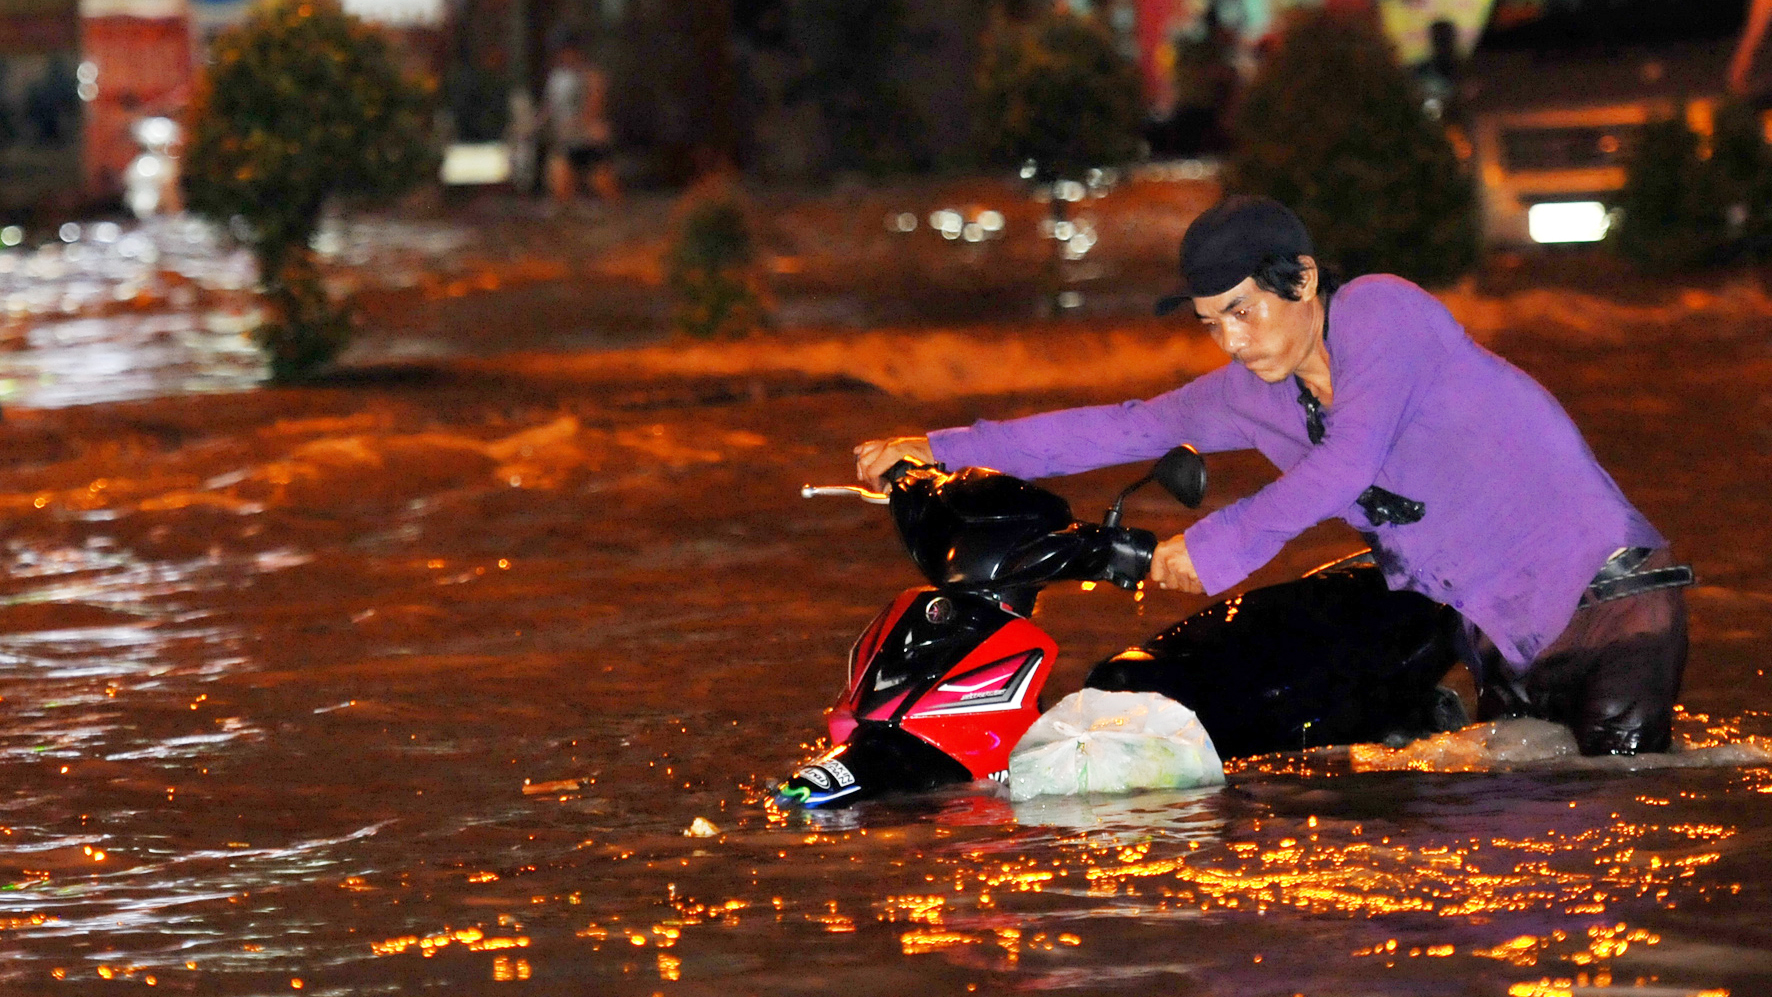 A man pushes his motorbike through the floodwater.